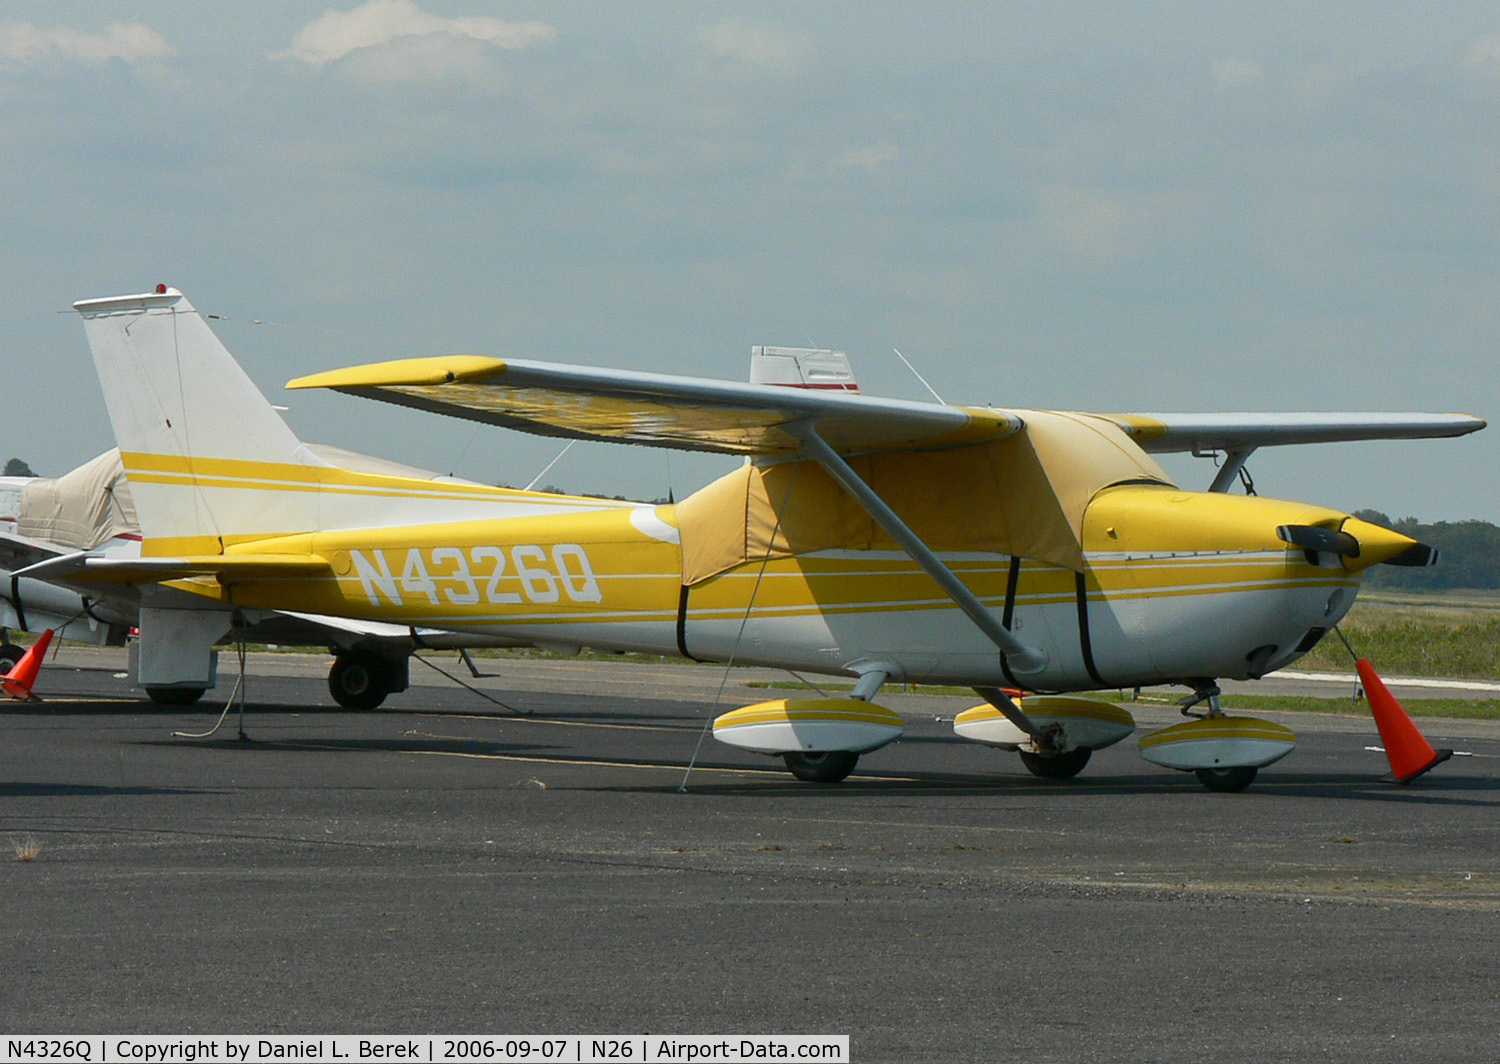 N4326Q, 1971 Cessna 172L C/N 17260226, The color scheme of this yellow 1971 Cessna blends in well with the summer sea air.